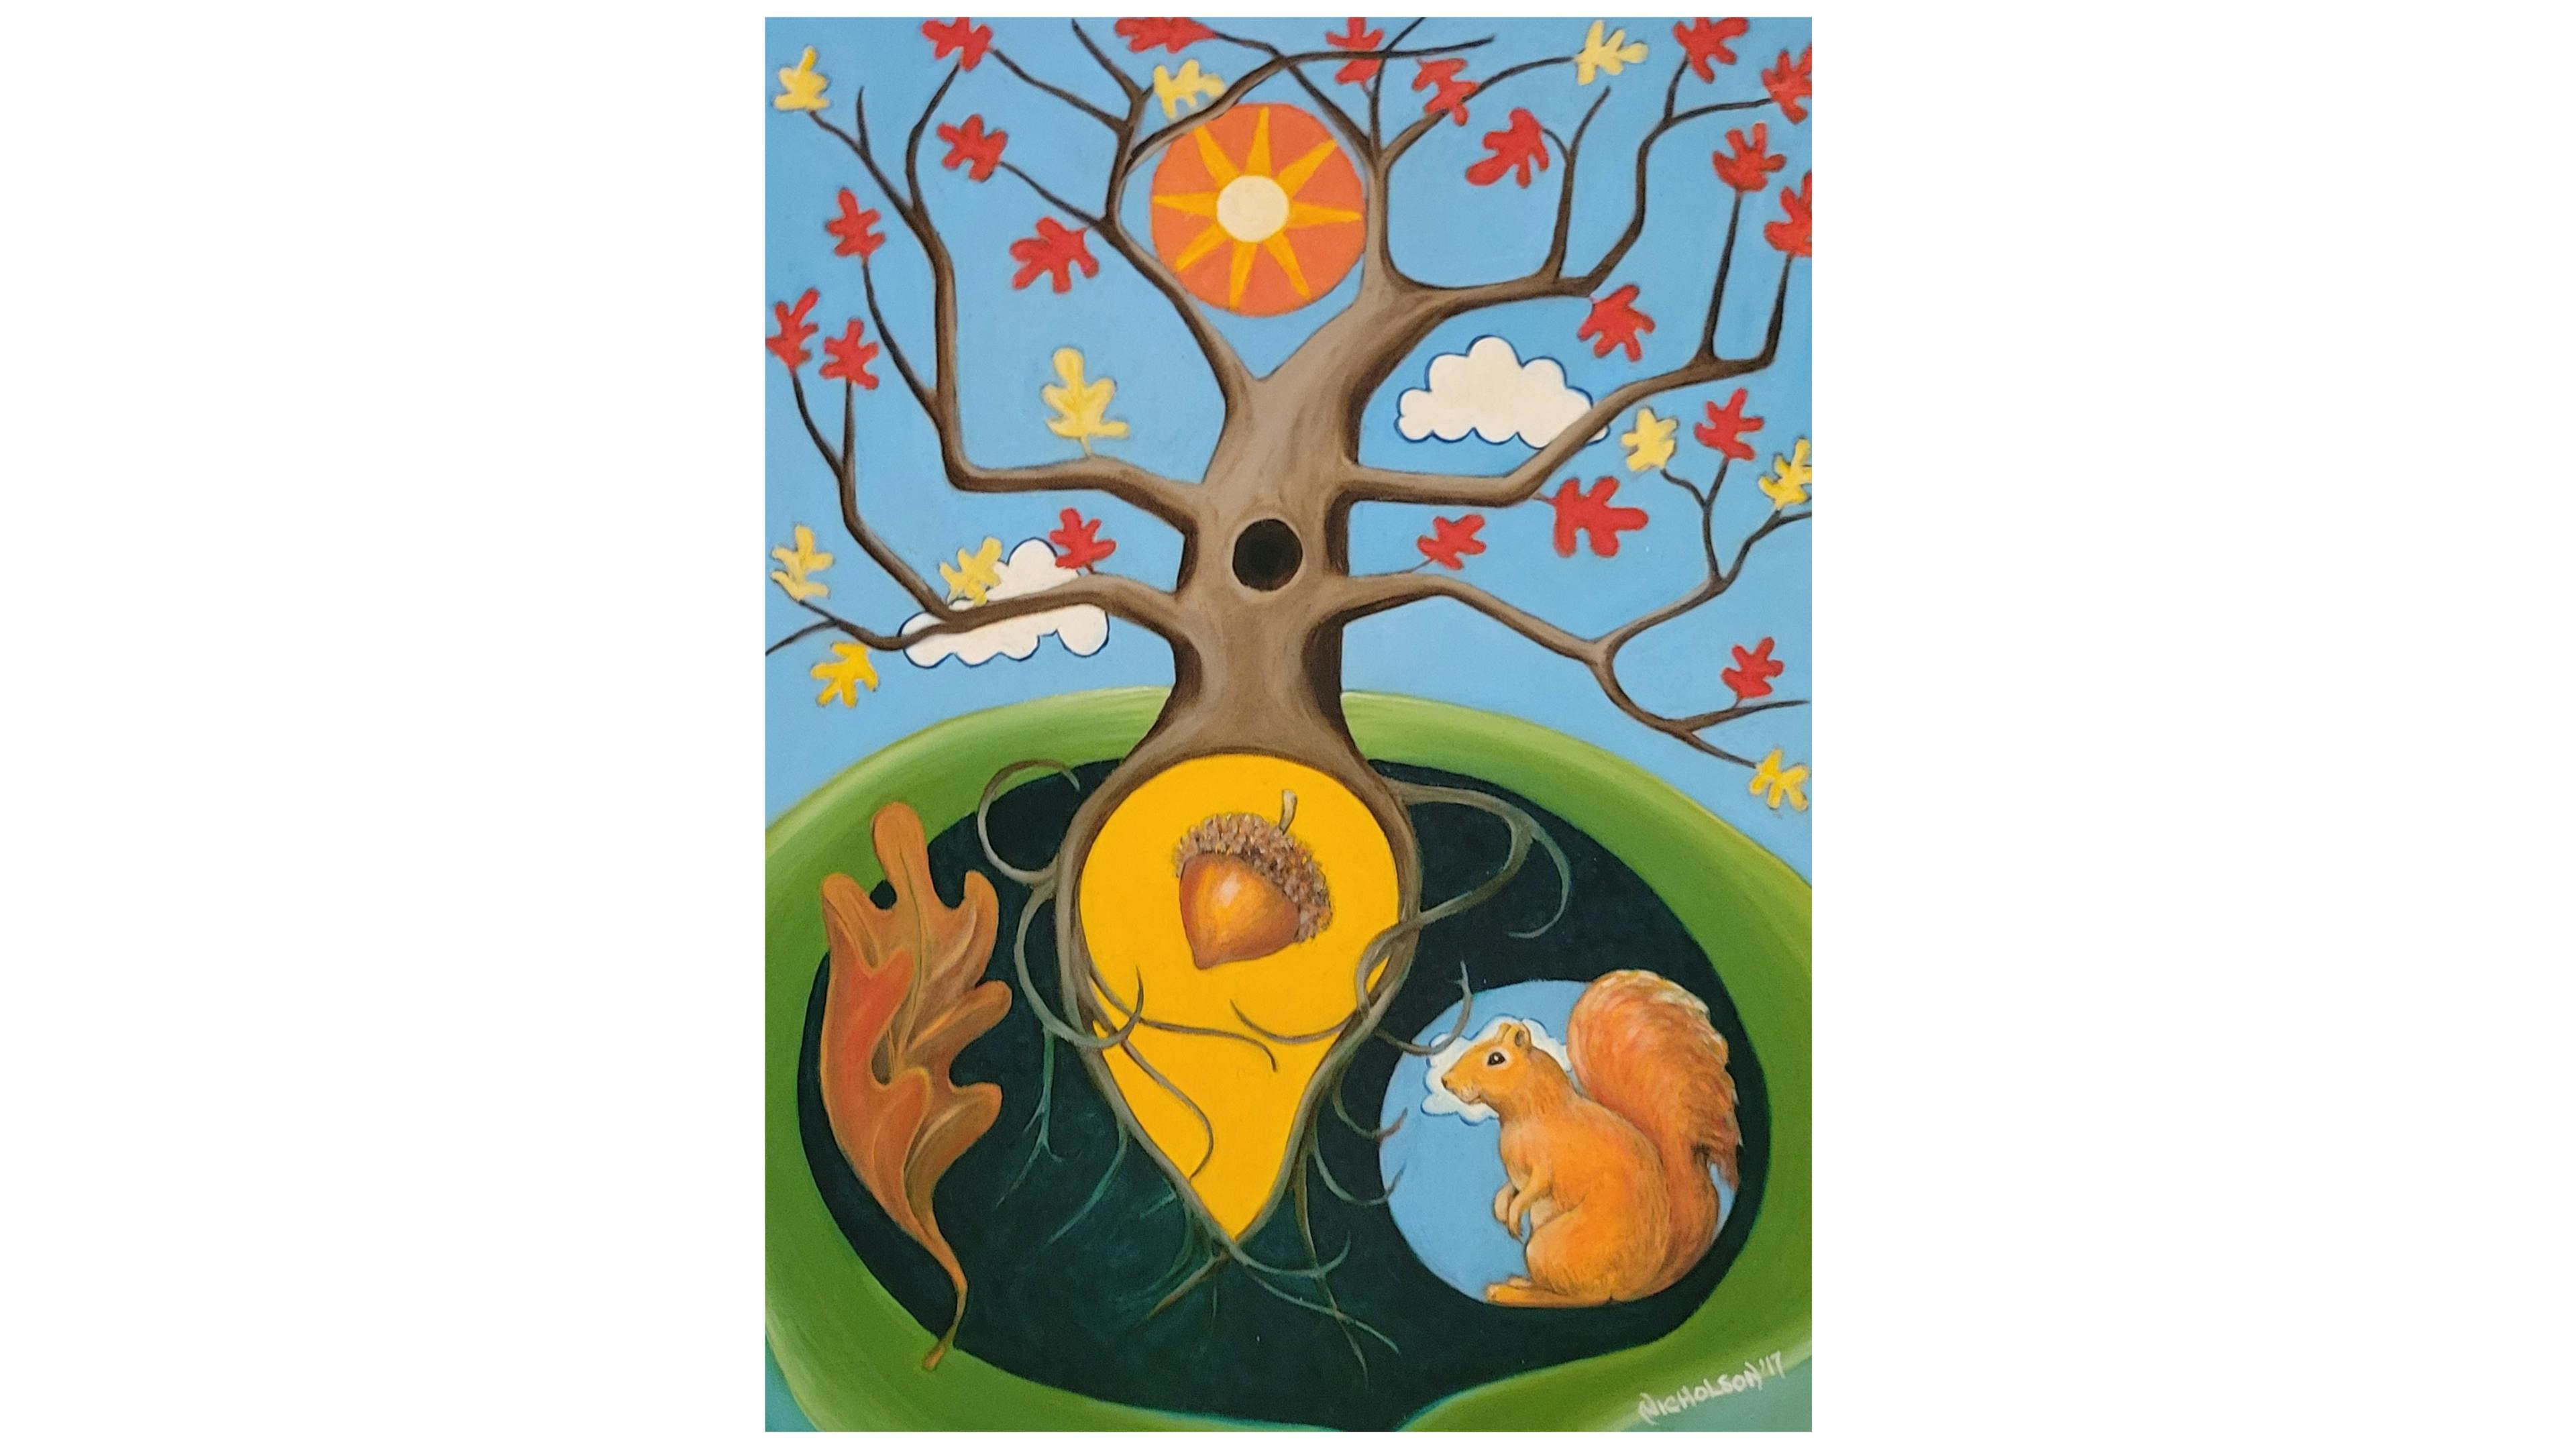 This oil painting depicts a tree that stands unwaveringly rooted amidst the lush greenery below, providing a framework for the central focus  which is a squirrel, an oak leaf, and an acorn, all symbolic for the heart of squirreldom. Above, a stylized sun takes its place within the nearly bare branches of the ancient oak with very little yellow and orange leaves.